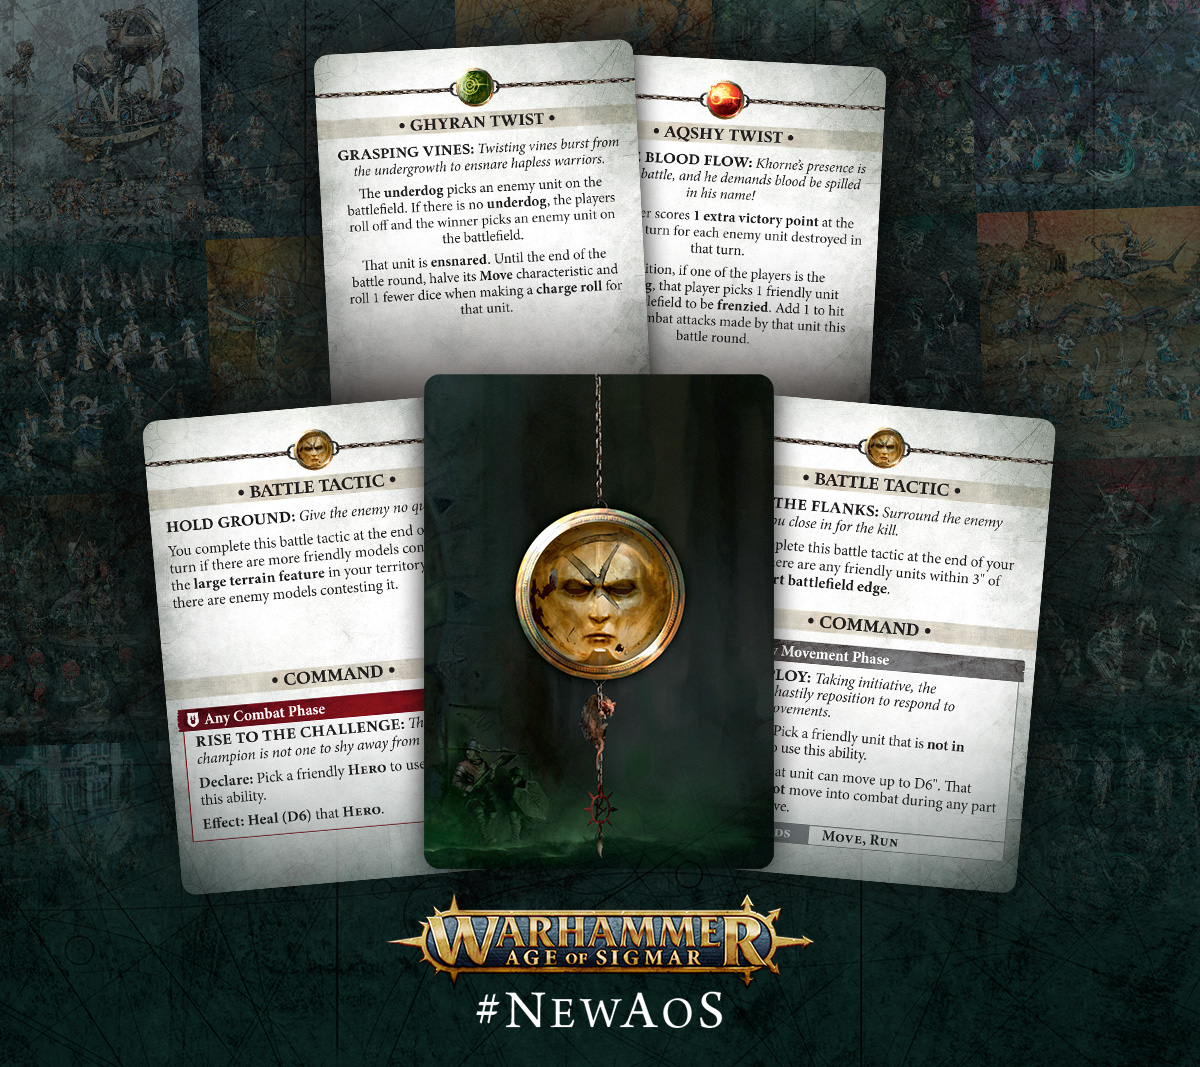 Spearhead games in #NewAoS give you some tough choices. Learn more about scoring battle tactics. bit.ly/3WGVVoD #WarhammerCommunity